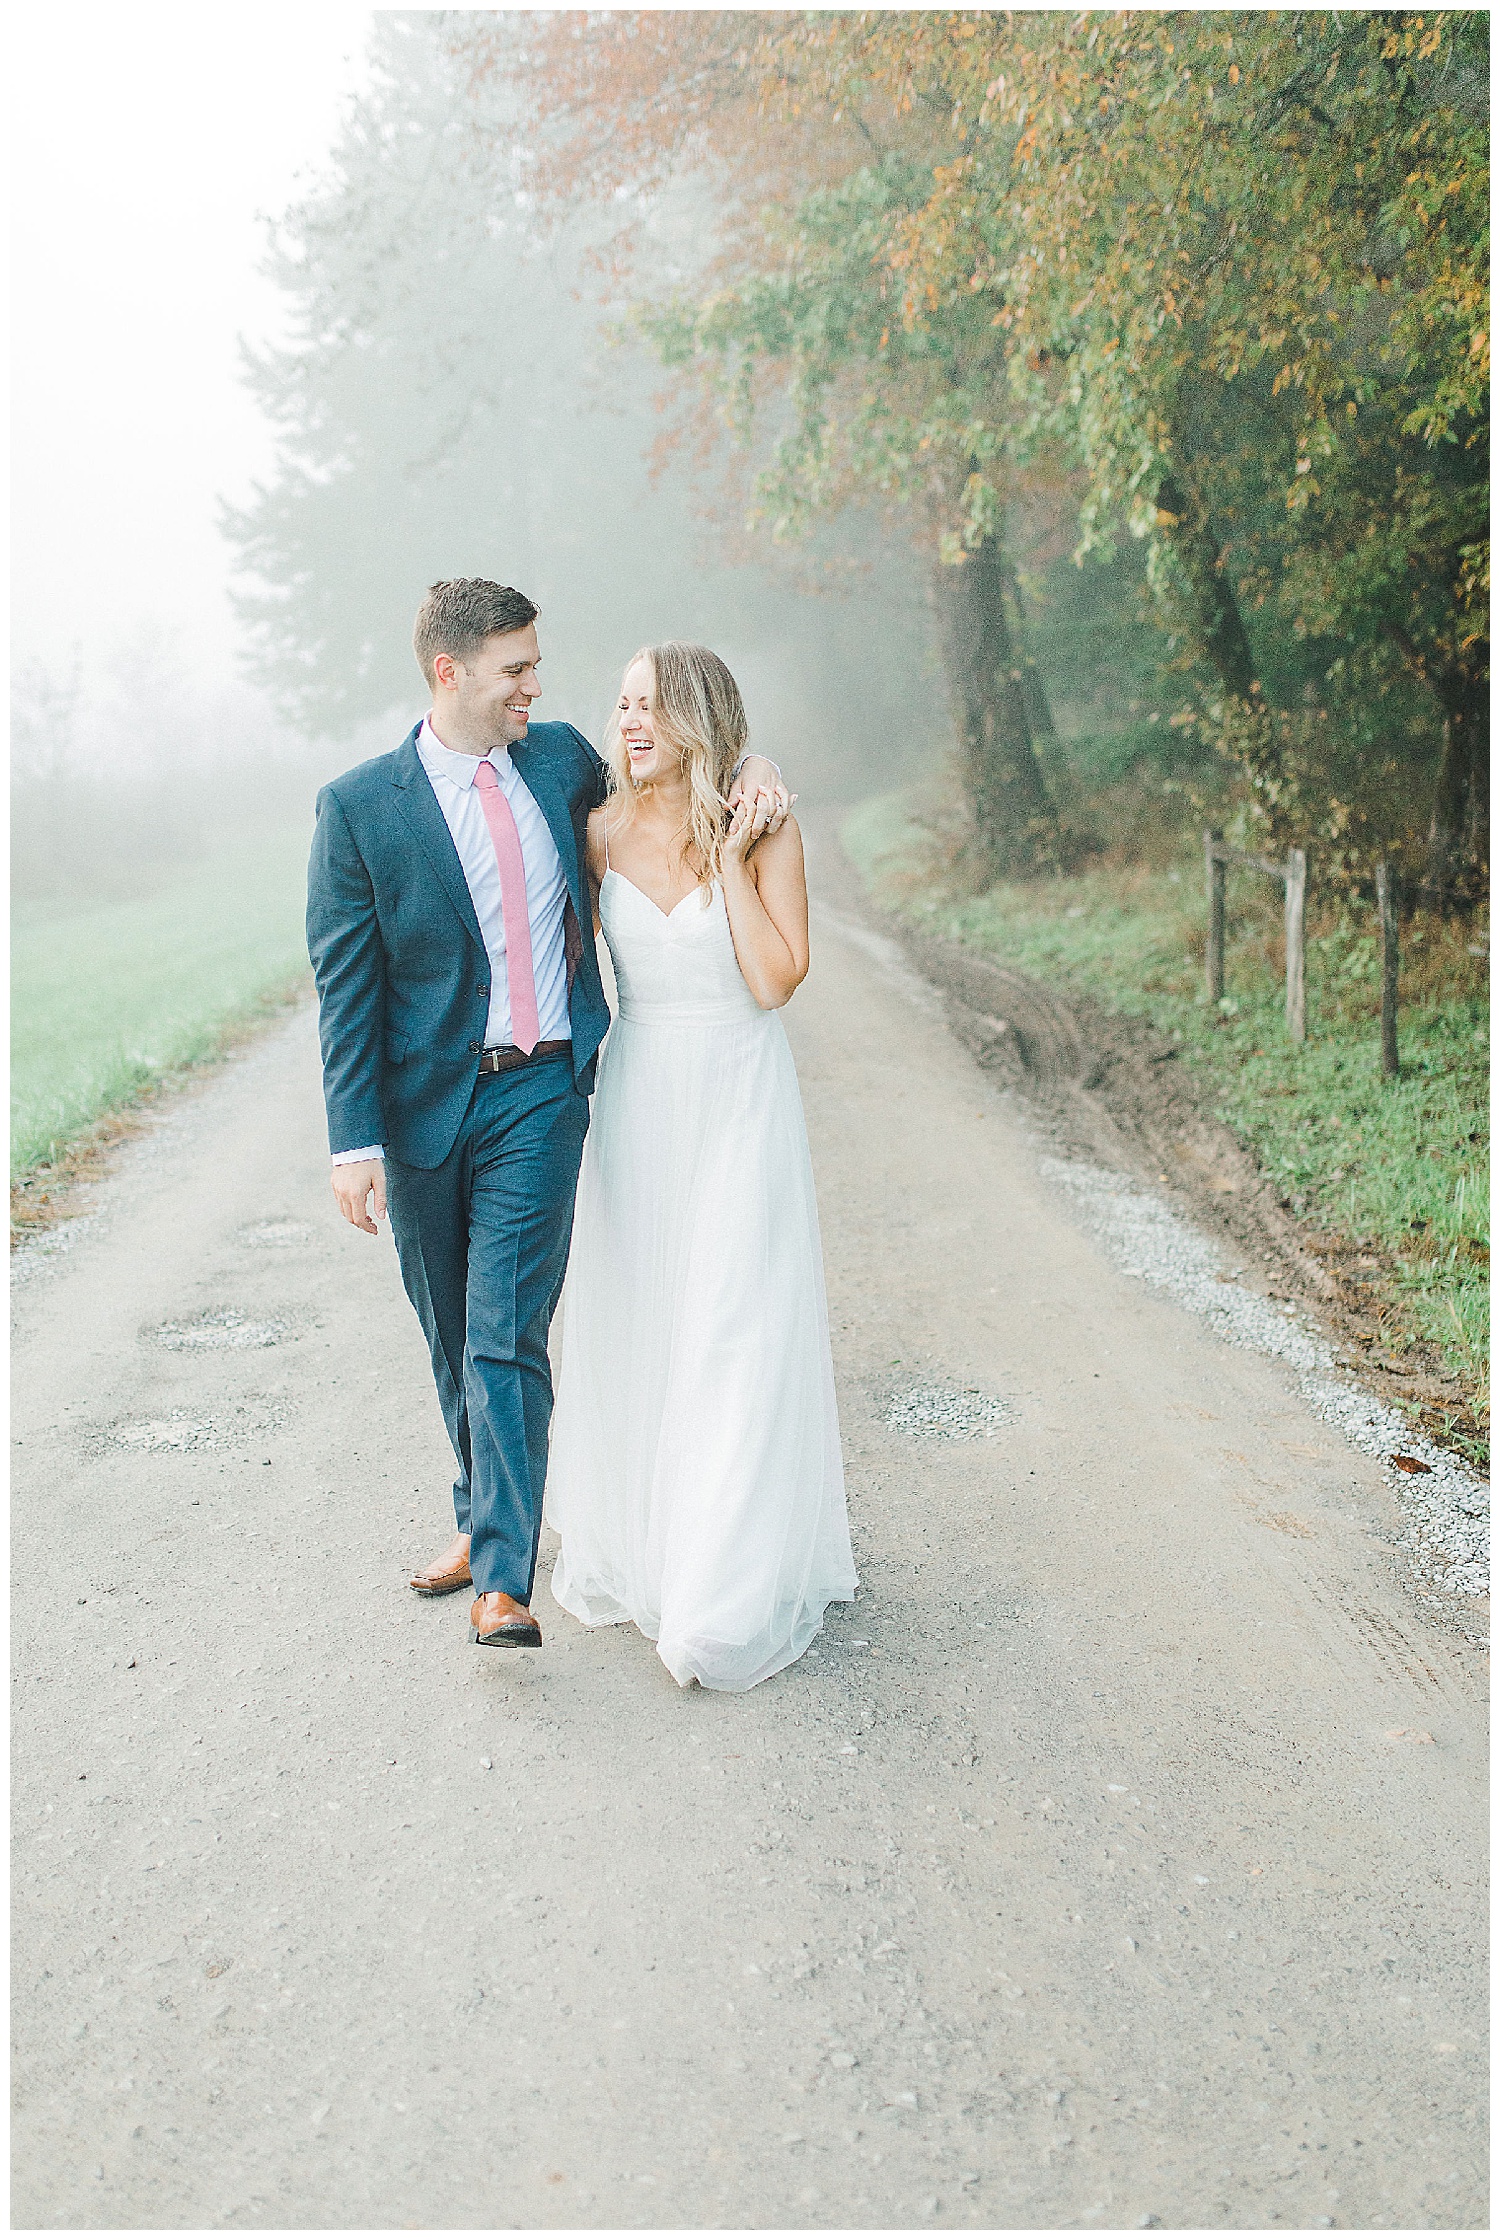 Emma Rose Company recently got to travel all the way to Nashville to photograph the most beautiful post-wedding bride and groom portraits in the Great Smoky Mountains with a gorgeous couple! Nashville wedding inspiration at it's finest._0021.jpg